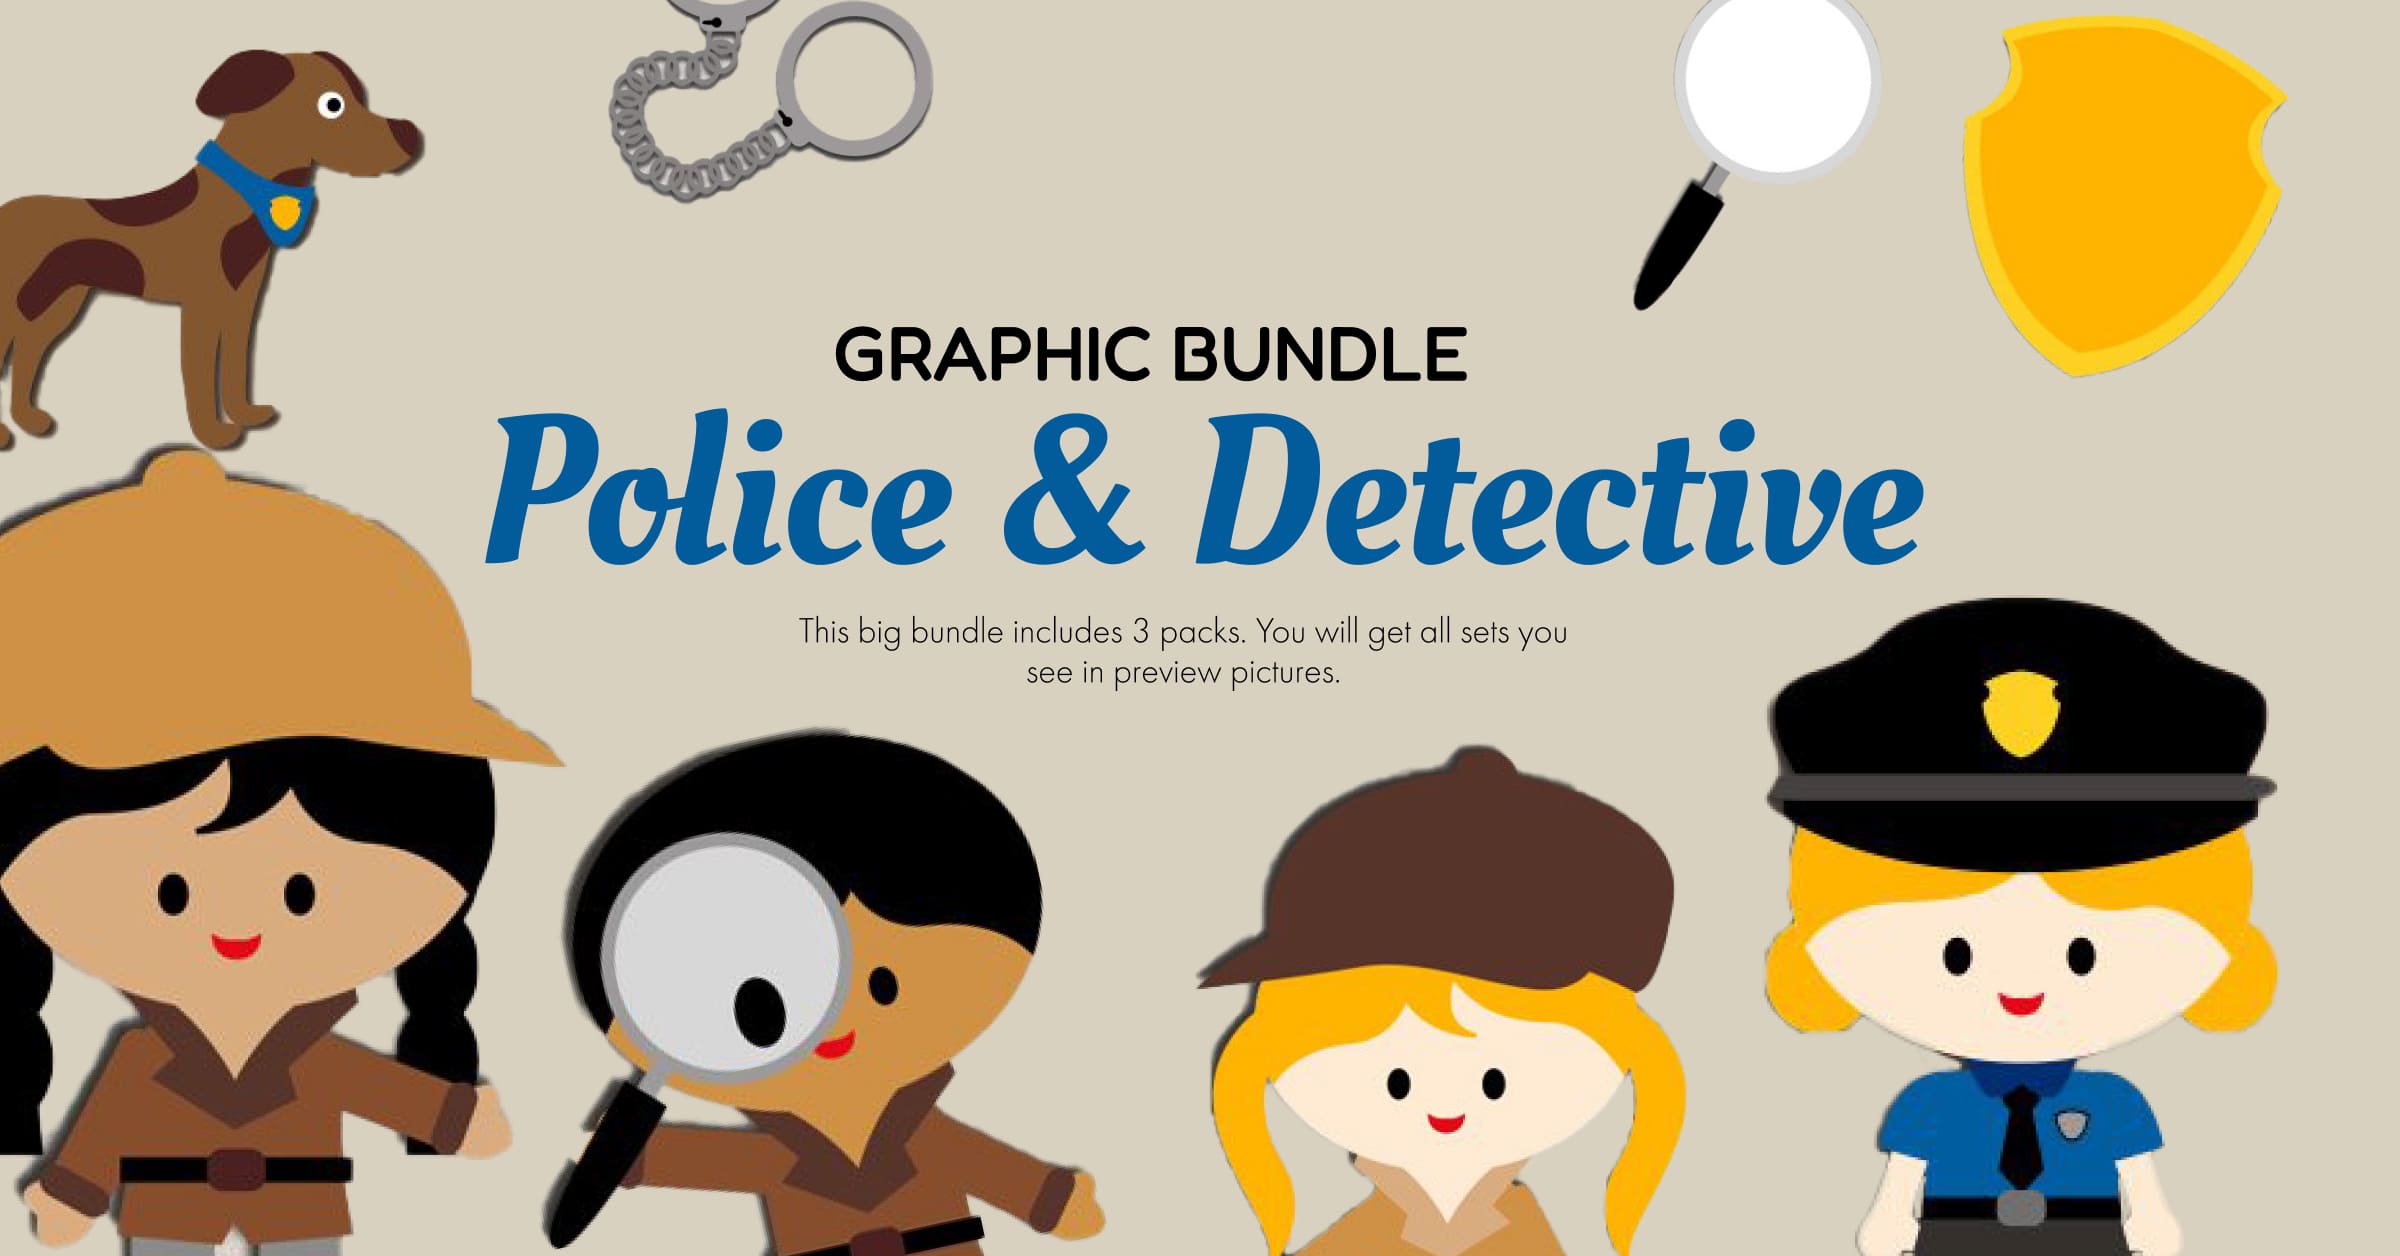 Police Officer And Detective Graphic Bundle - Facebook.